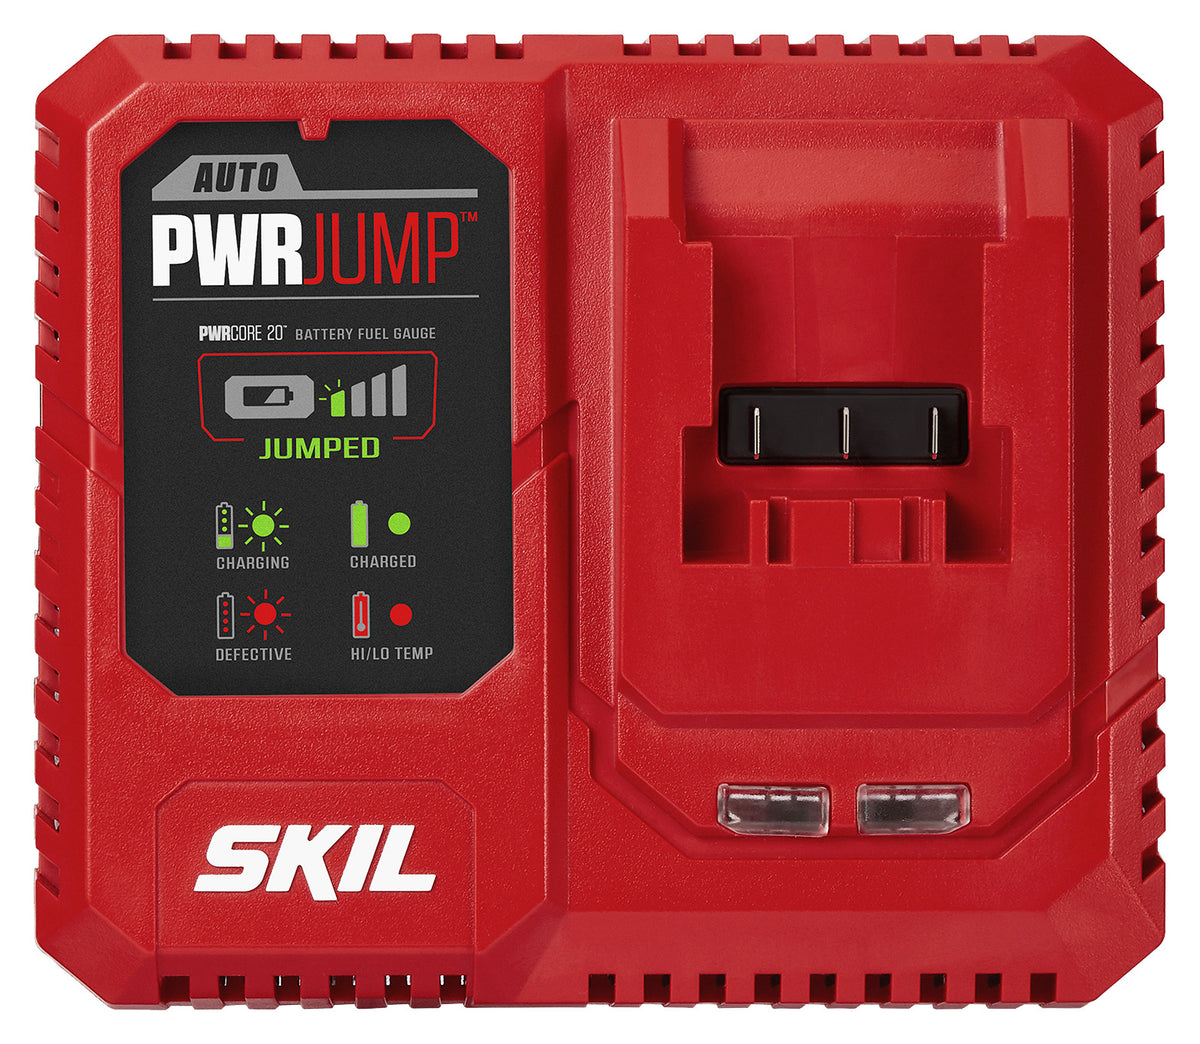 Skil QC536001 Pwrcore 20 Auto Pwrjump Charger, 20V 6A